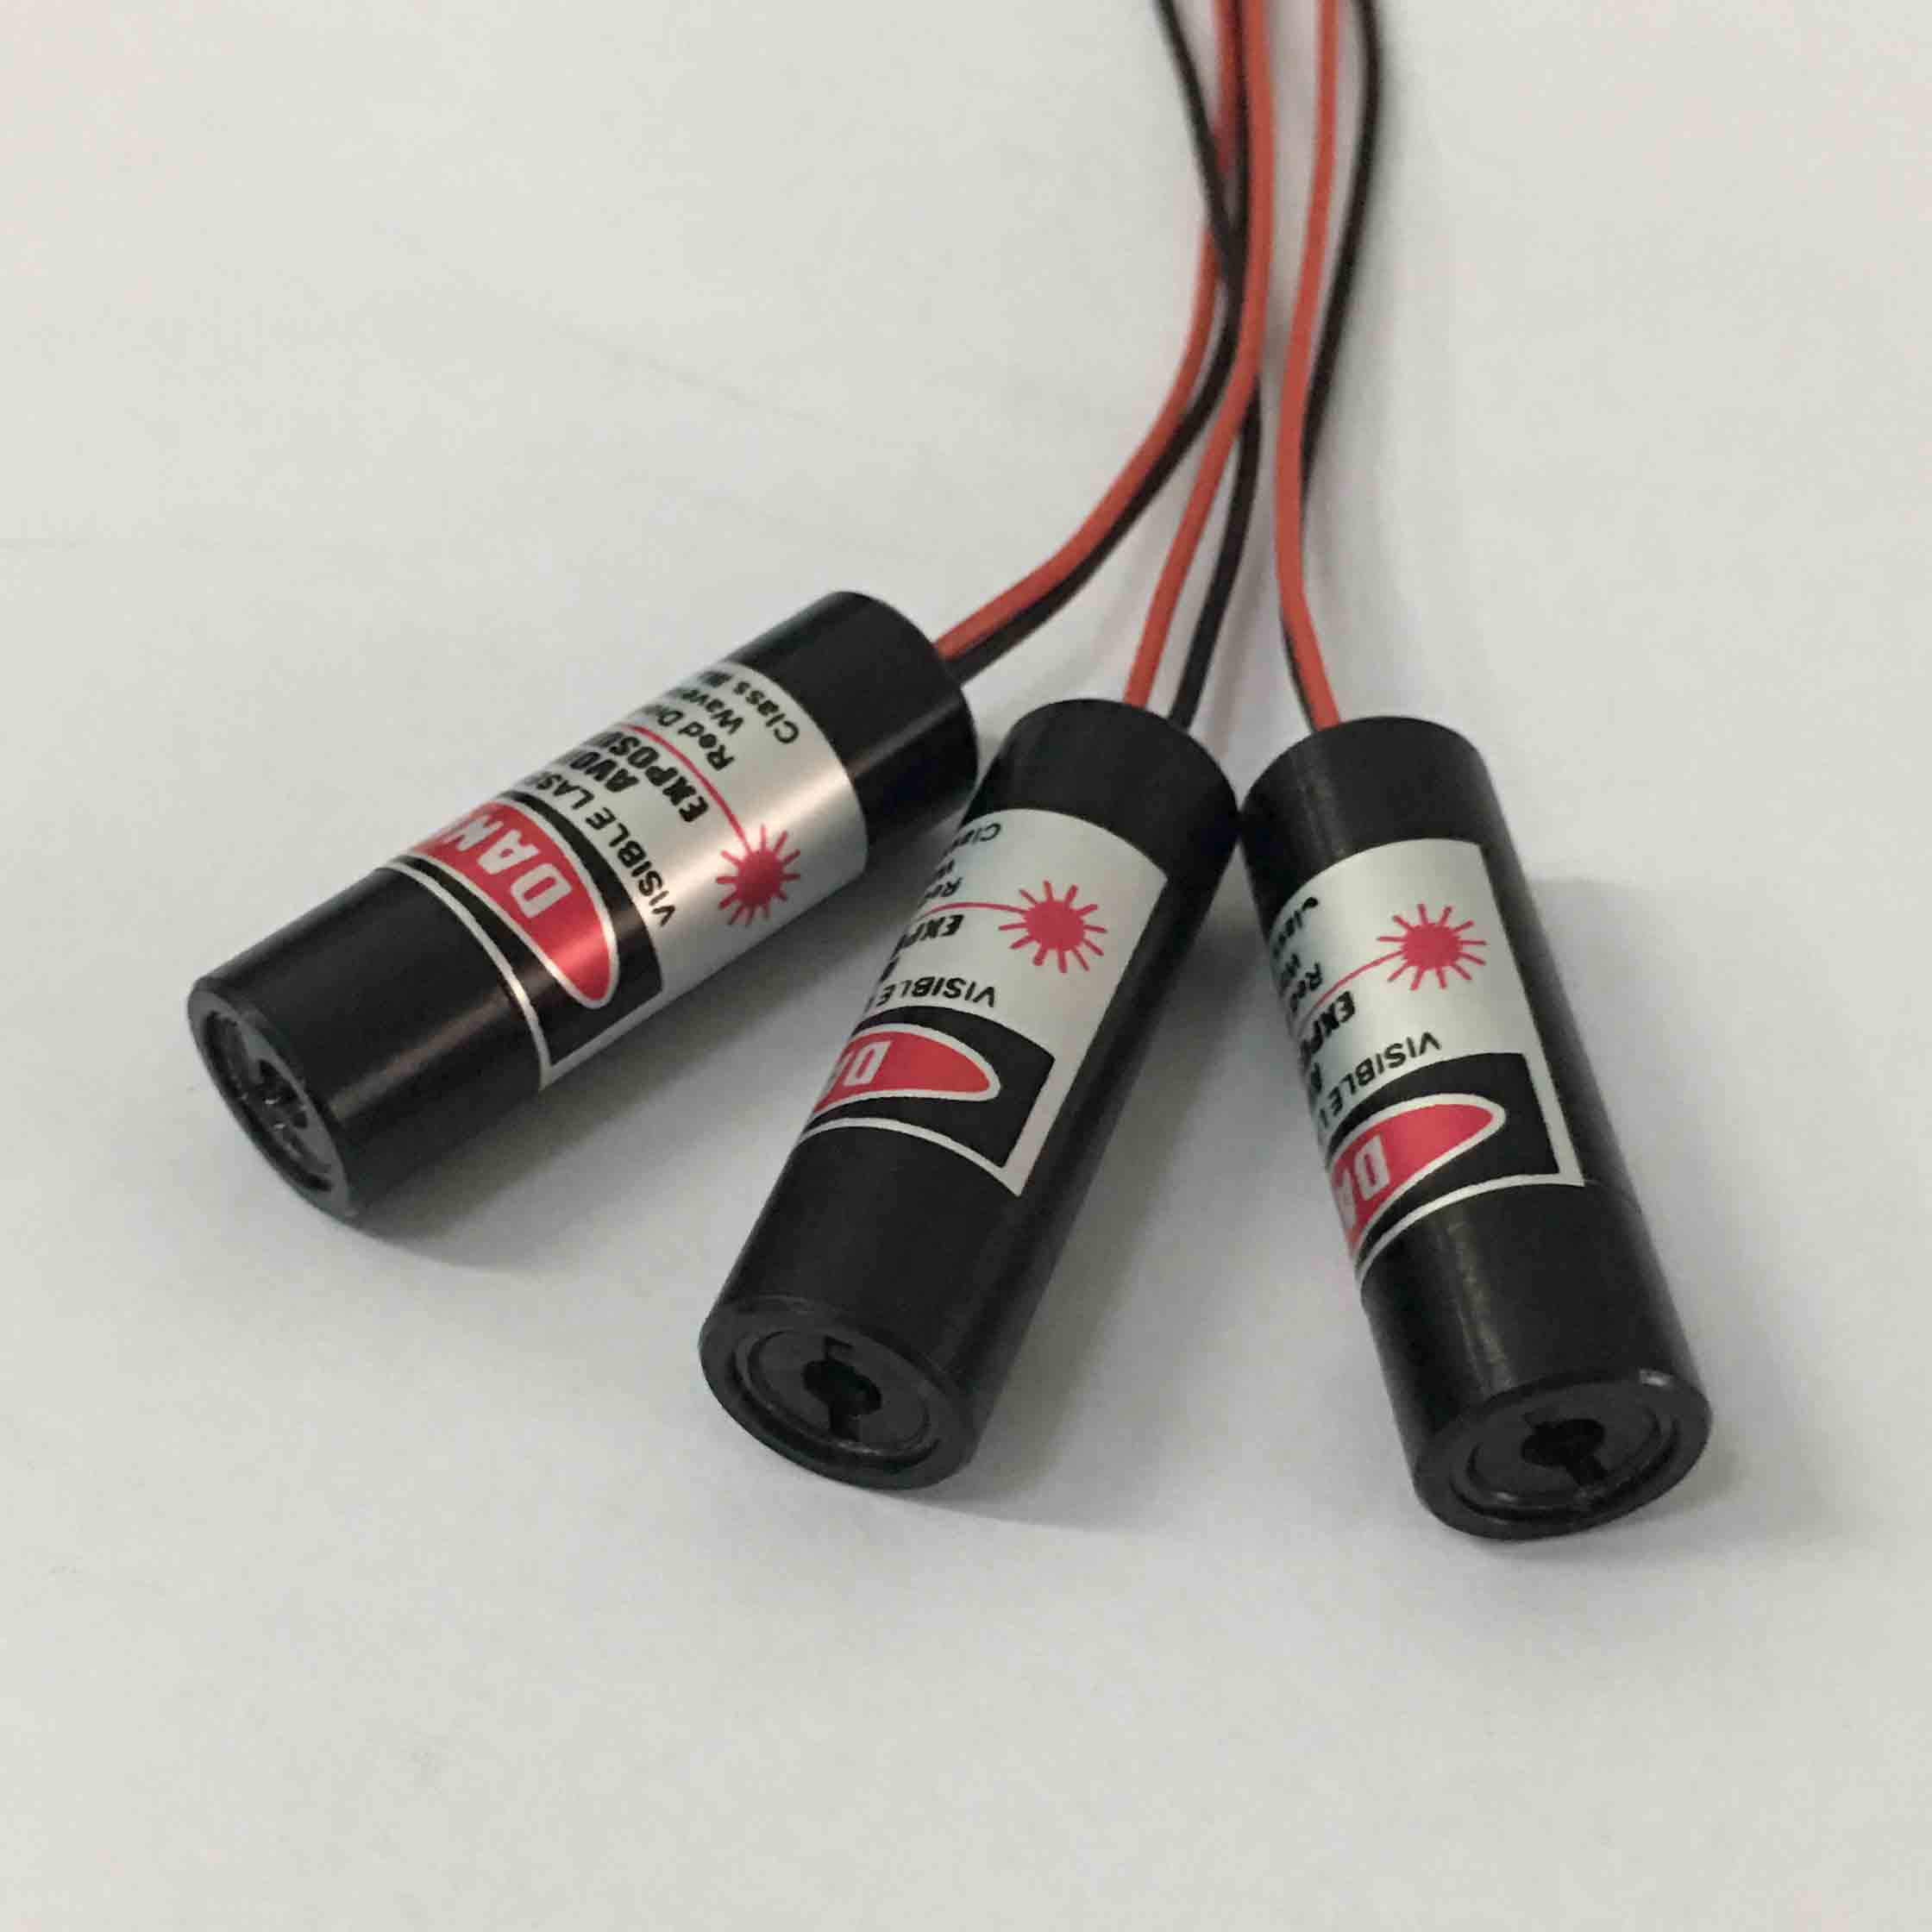 High Precision Alignment Laser Pointers 635nm 25mW Line with Dot Lasers